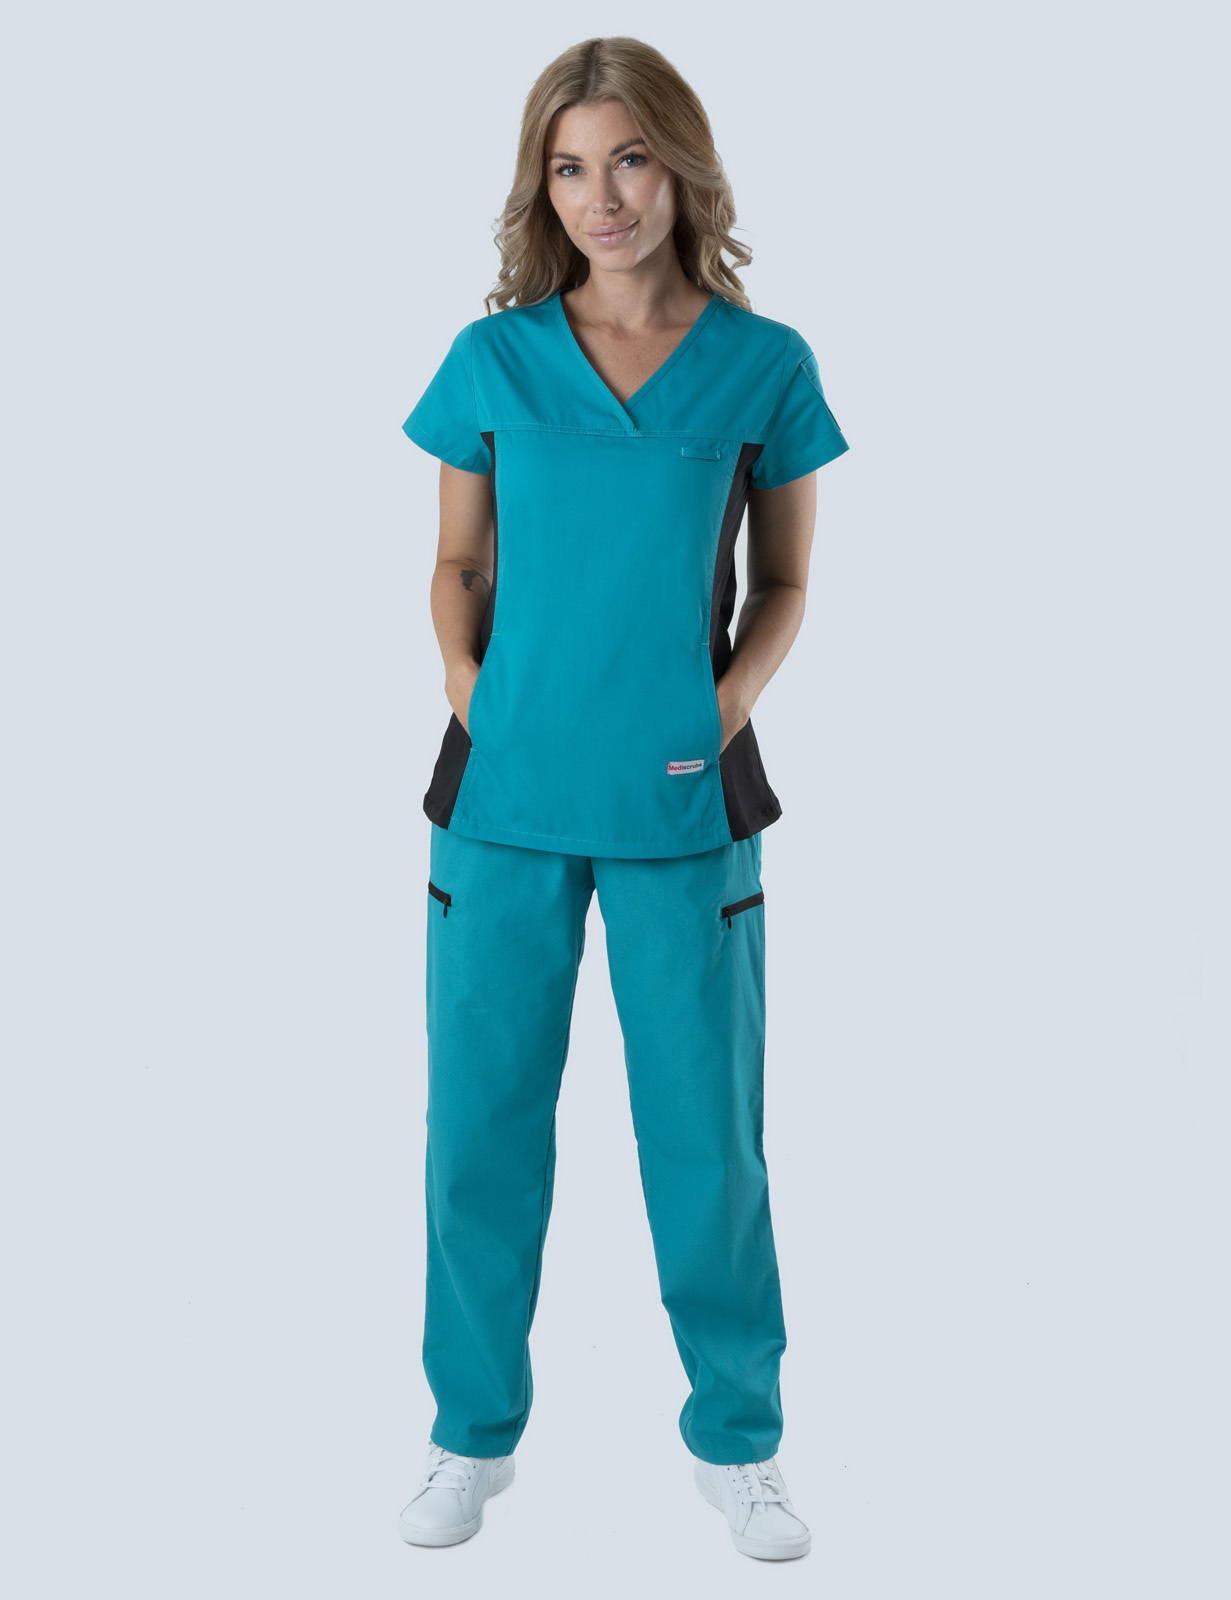 James Cook University - Radiology (Women's Fit Spandex Scrub Top and Cargo Pants in Teal incl Logos)